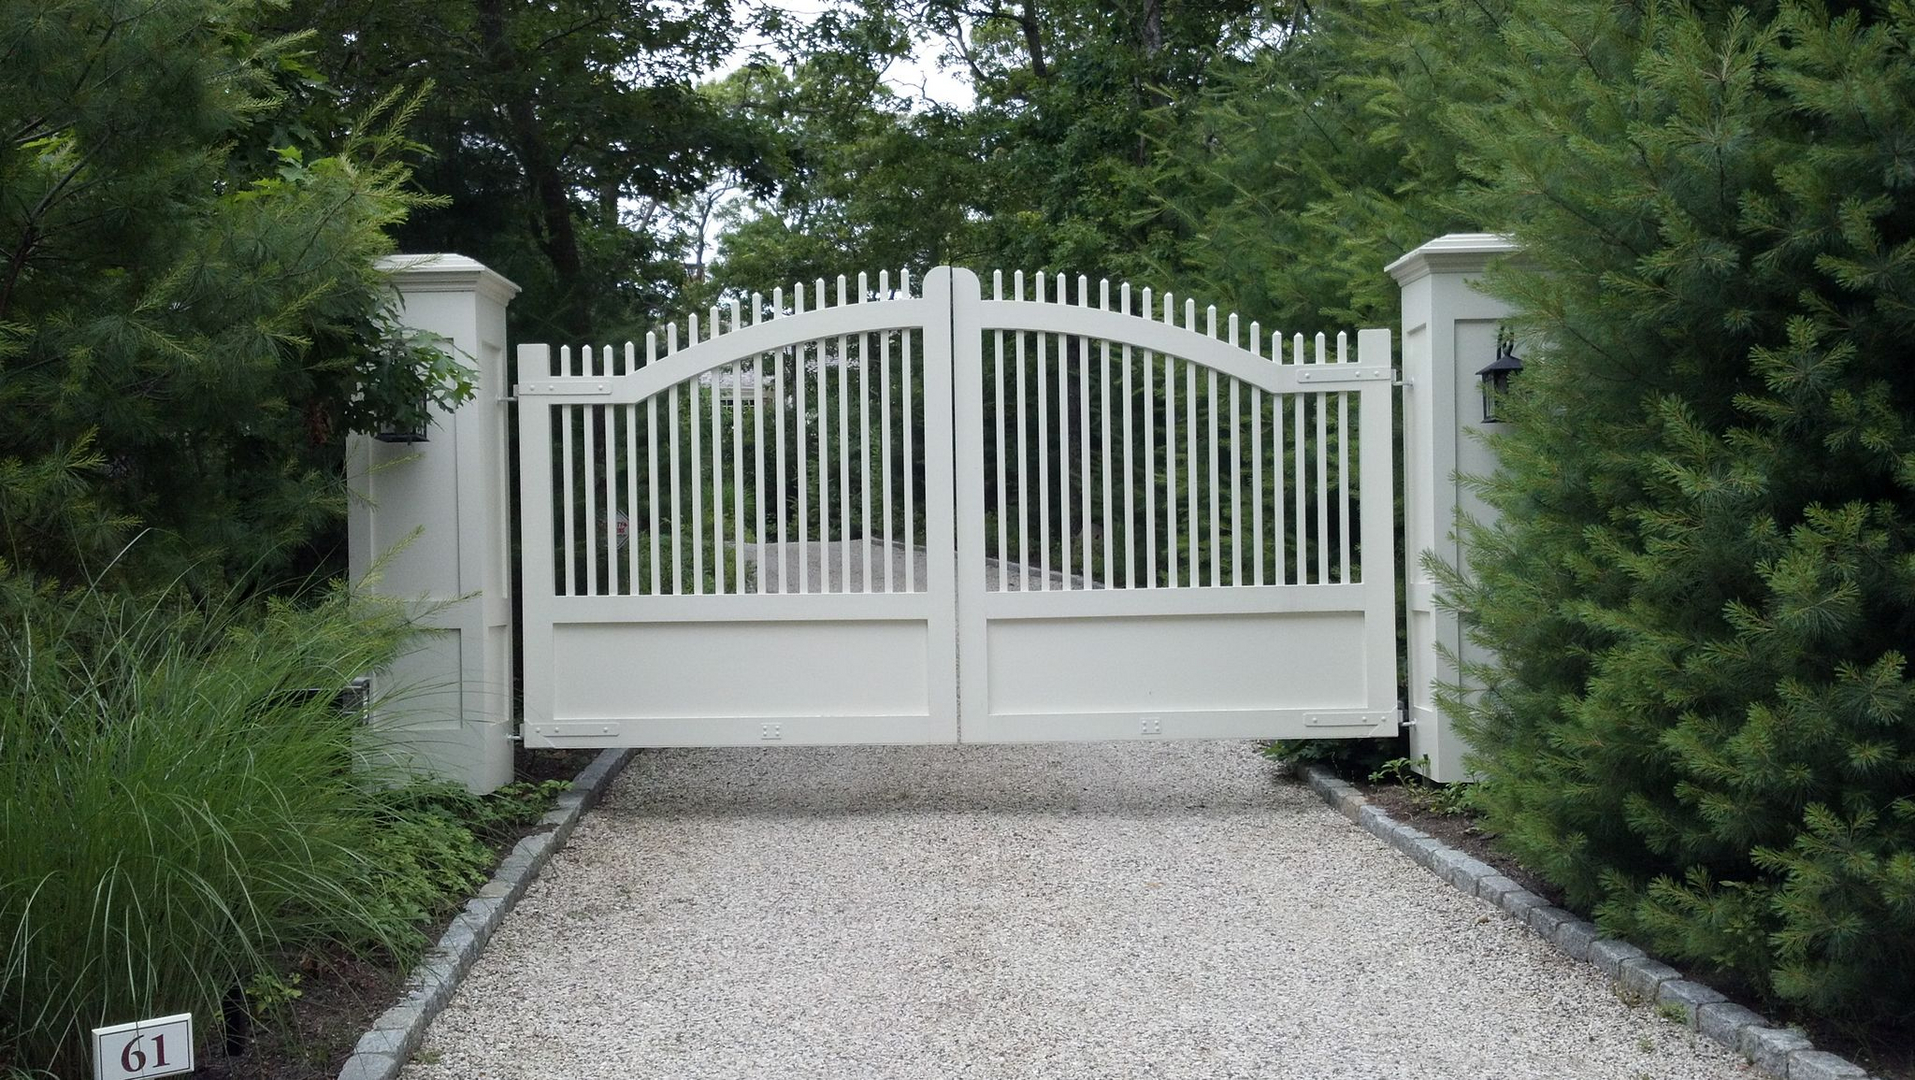 An automated gate from Craftsman Fence Corp. Courtesy Craftsman Fence Corp.